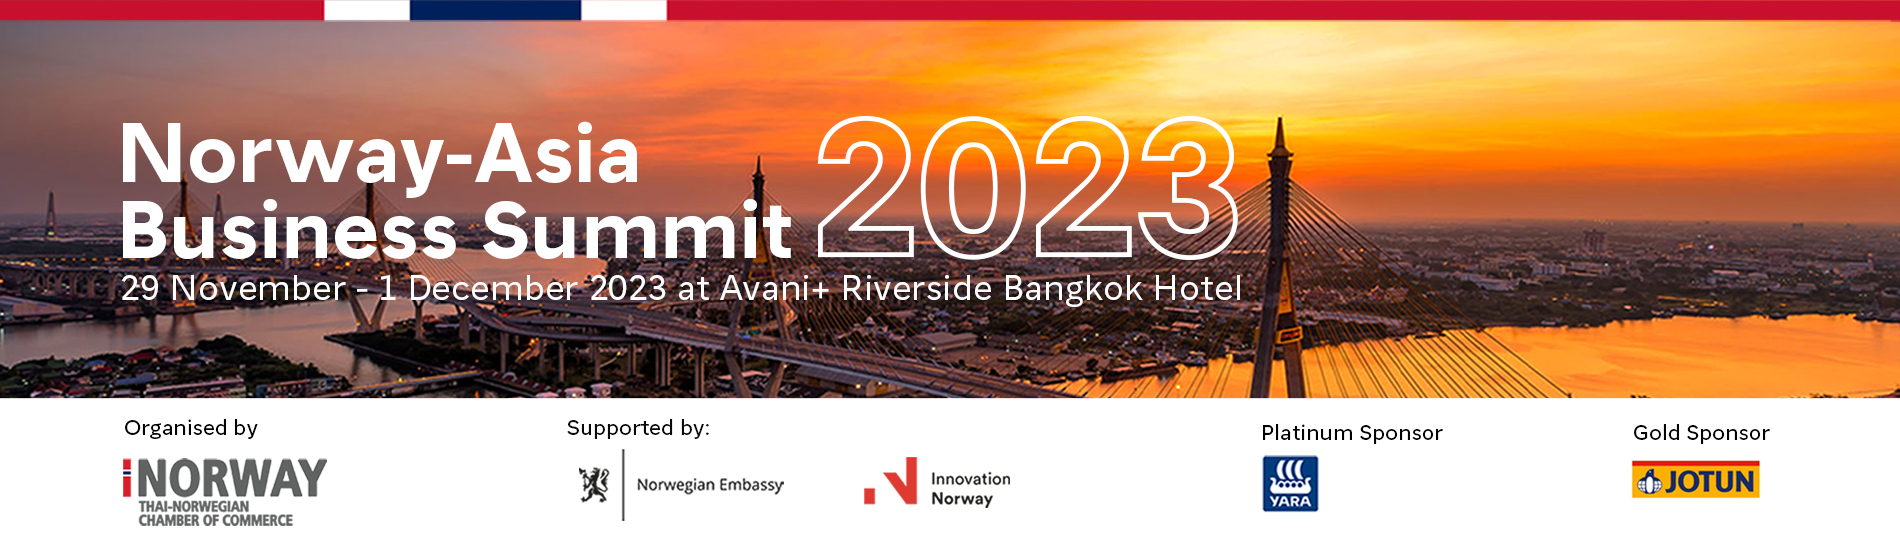 Volunteer Opportunity at Norway-Asia Business Summit 2023